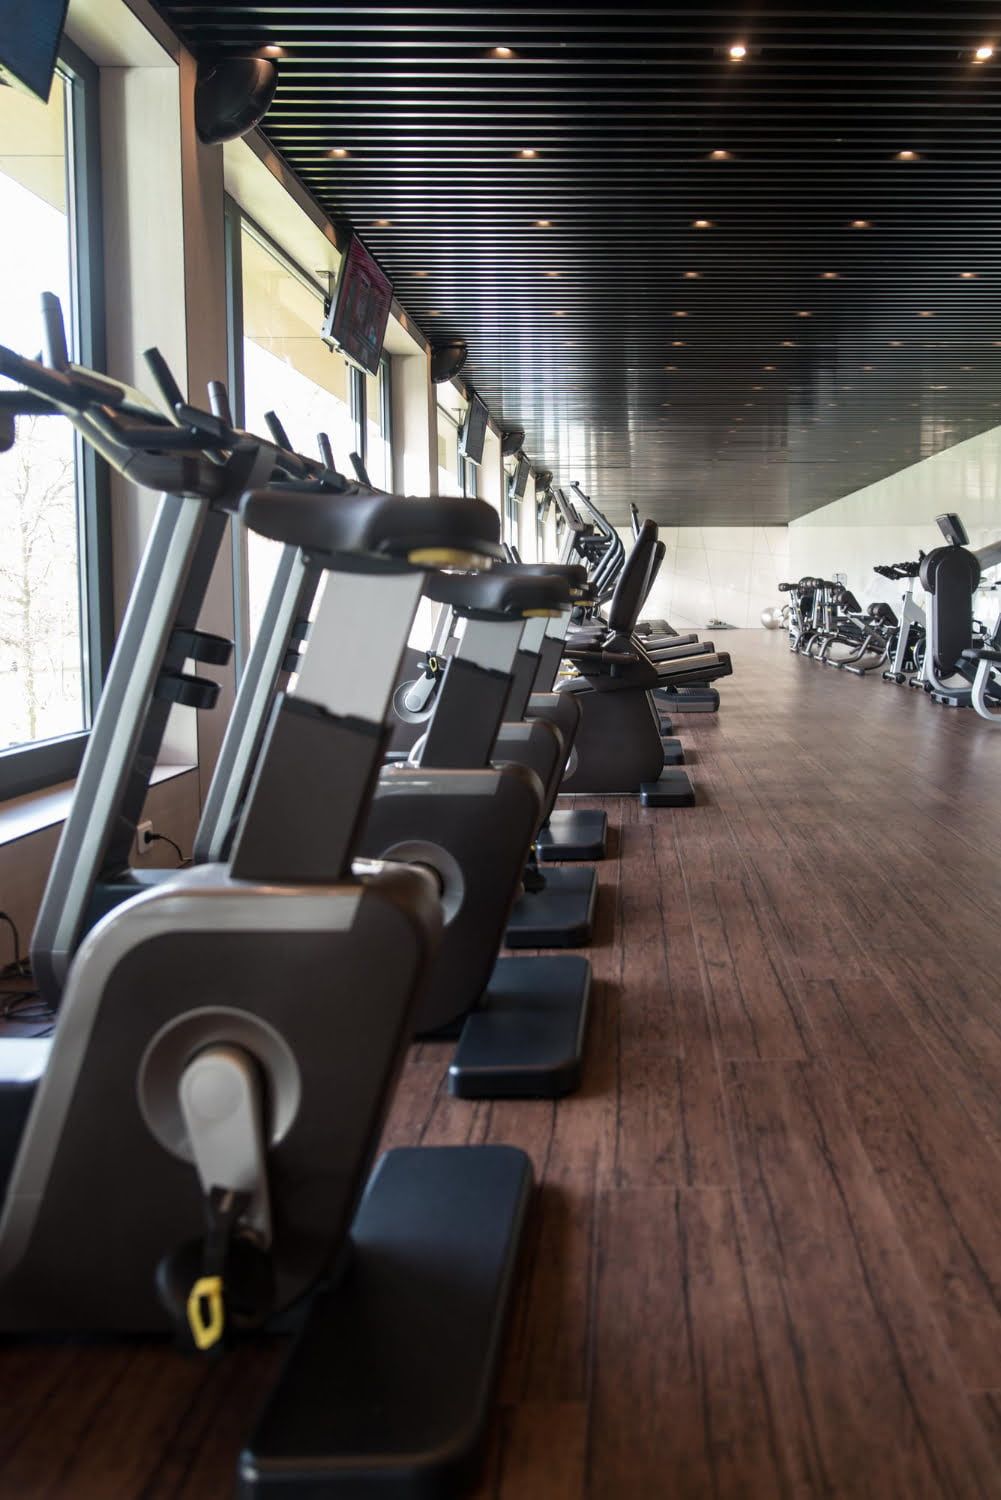 EnviroJan USA | Gym cleaning 1 | Serving Houston, Spring, and Katy